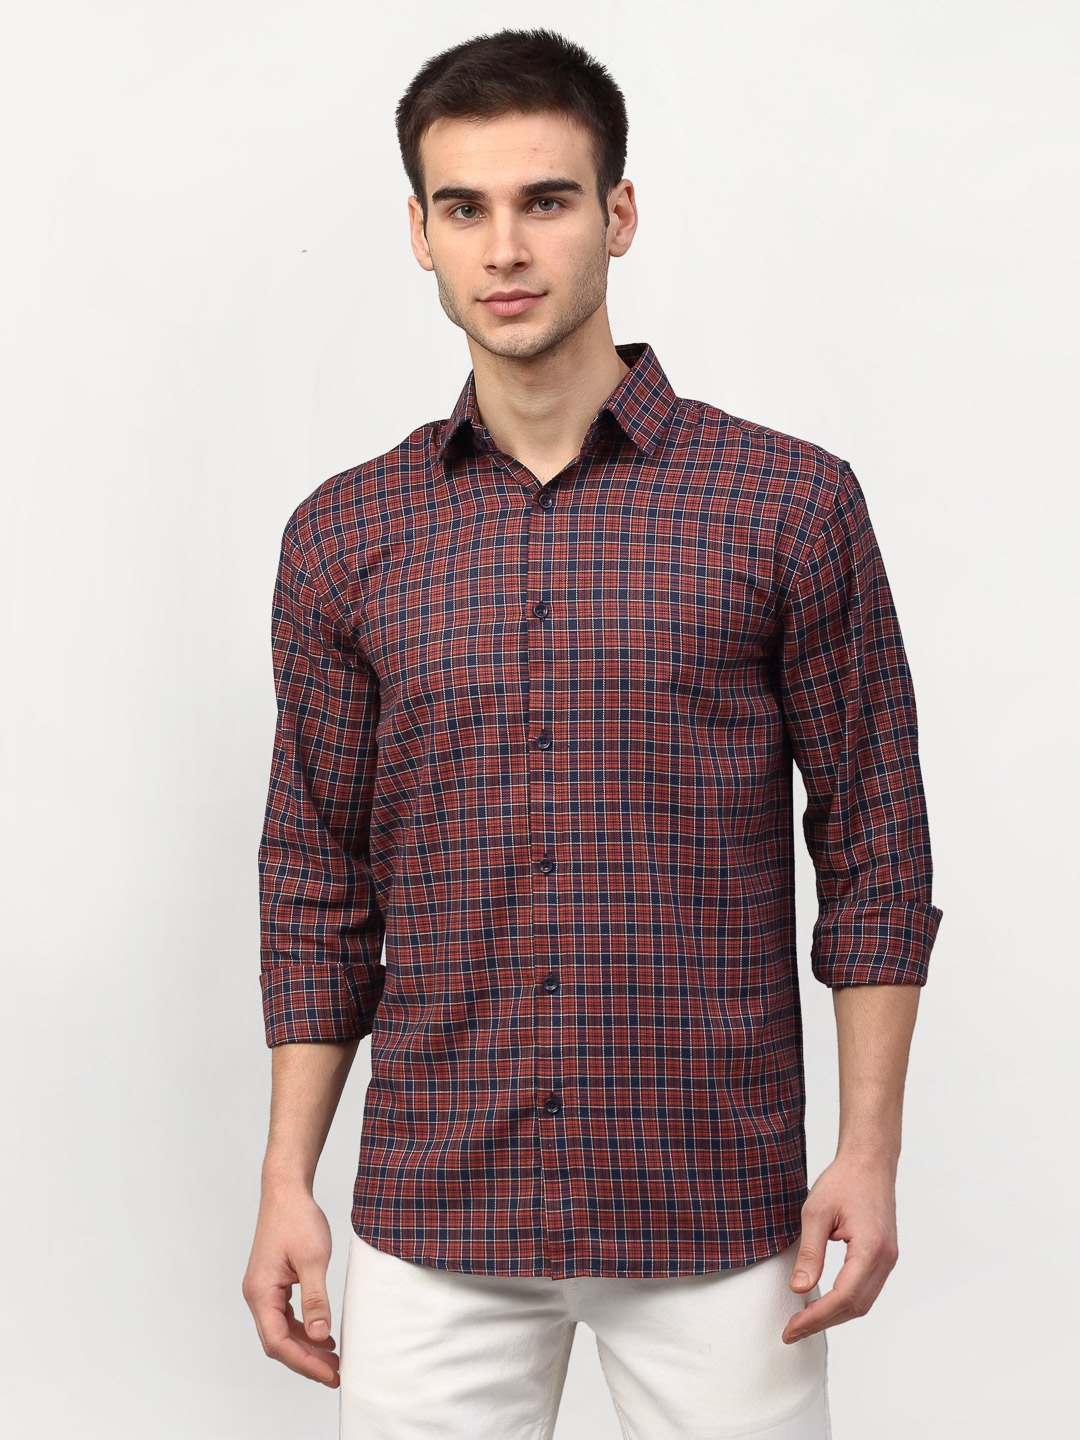 Men's Checked Casual Shirts